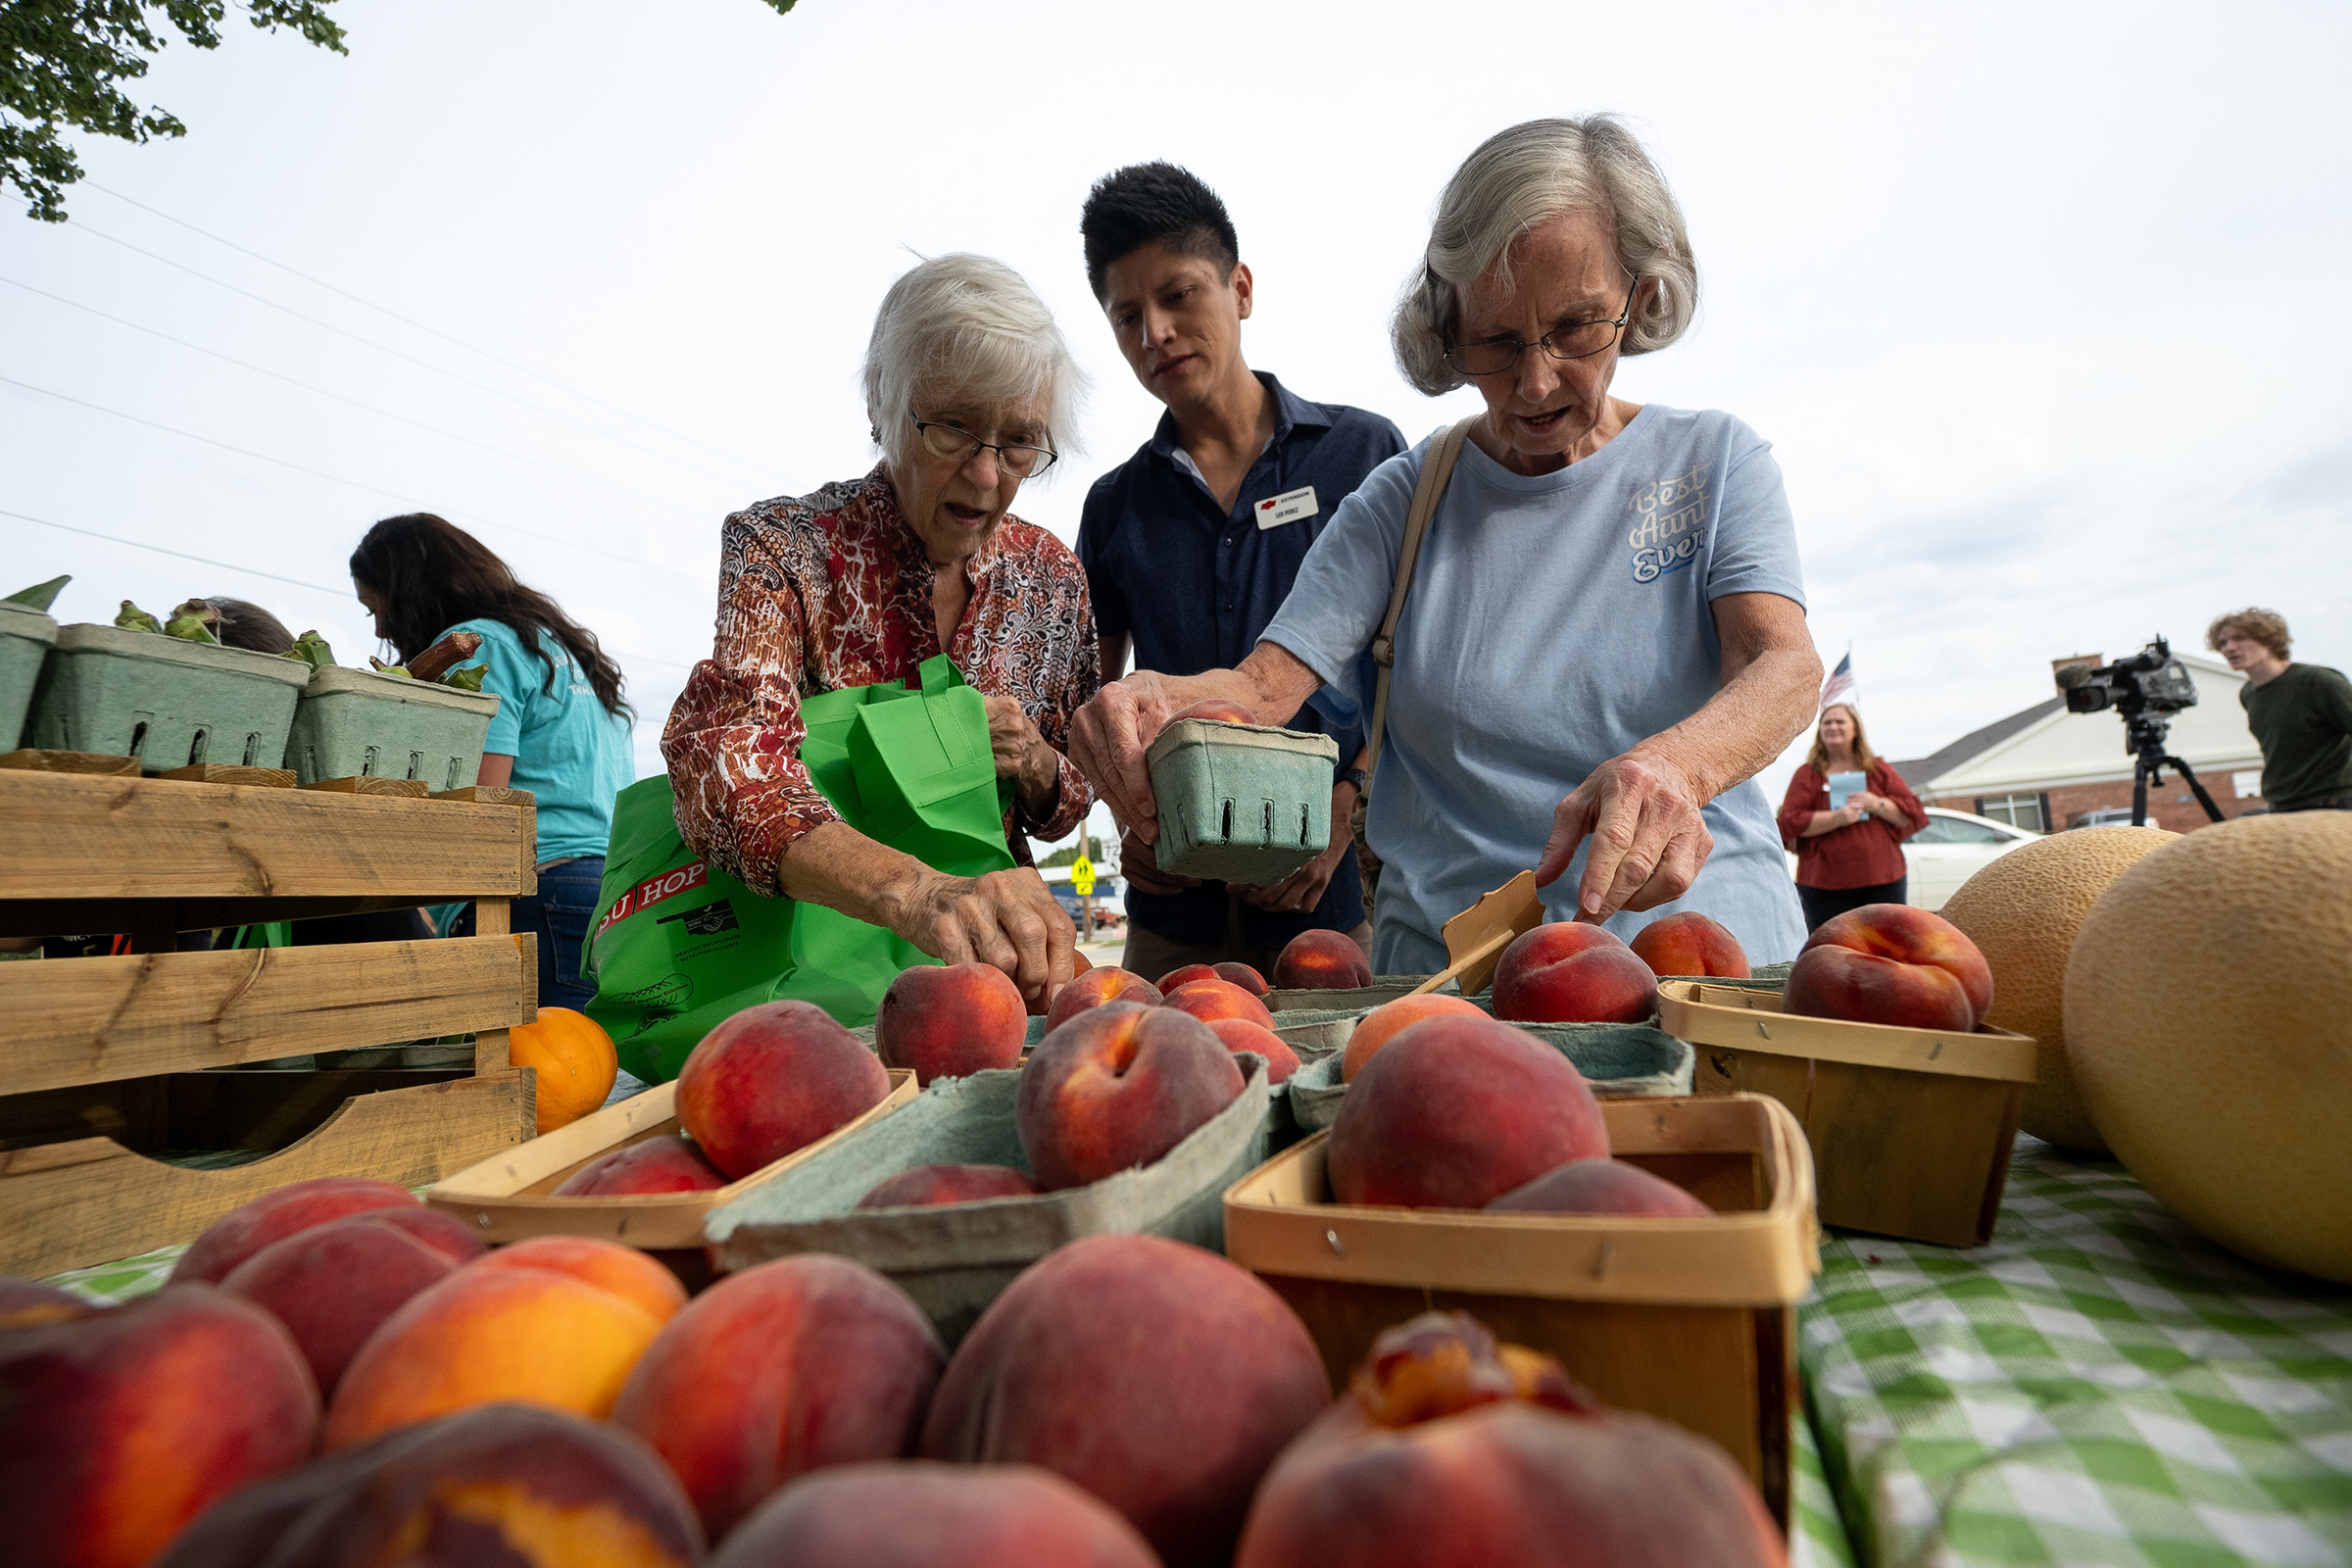 Leo Perez, center, Oklahoma State University Extension educator, special projects, helps senior residents in Haskell, Oklahoma, select locally grown fruits and vegetables during the downtown Mobile Market. (Photo by Mitchell Alcala, Oklahoma State University Agriculture.)